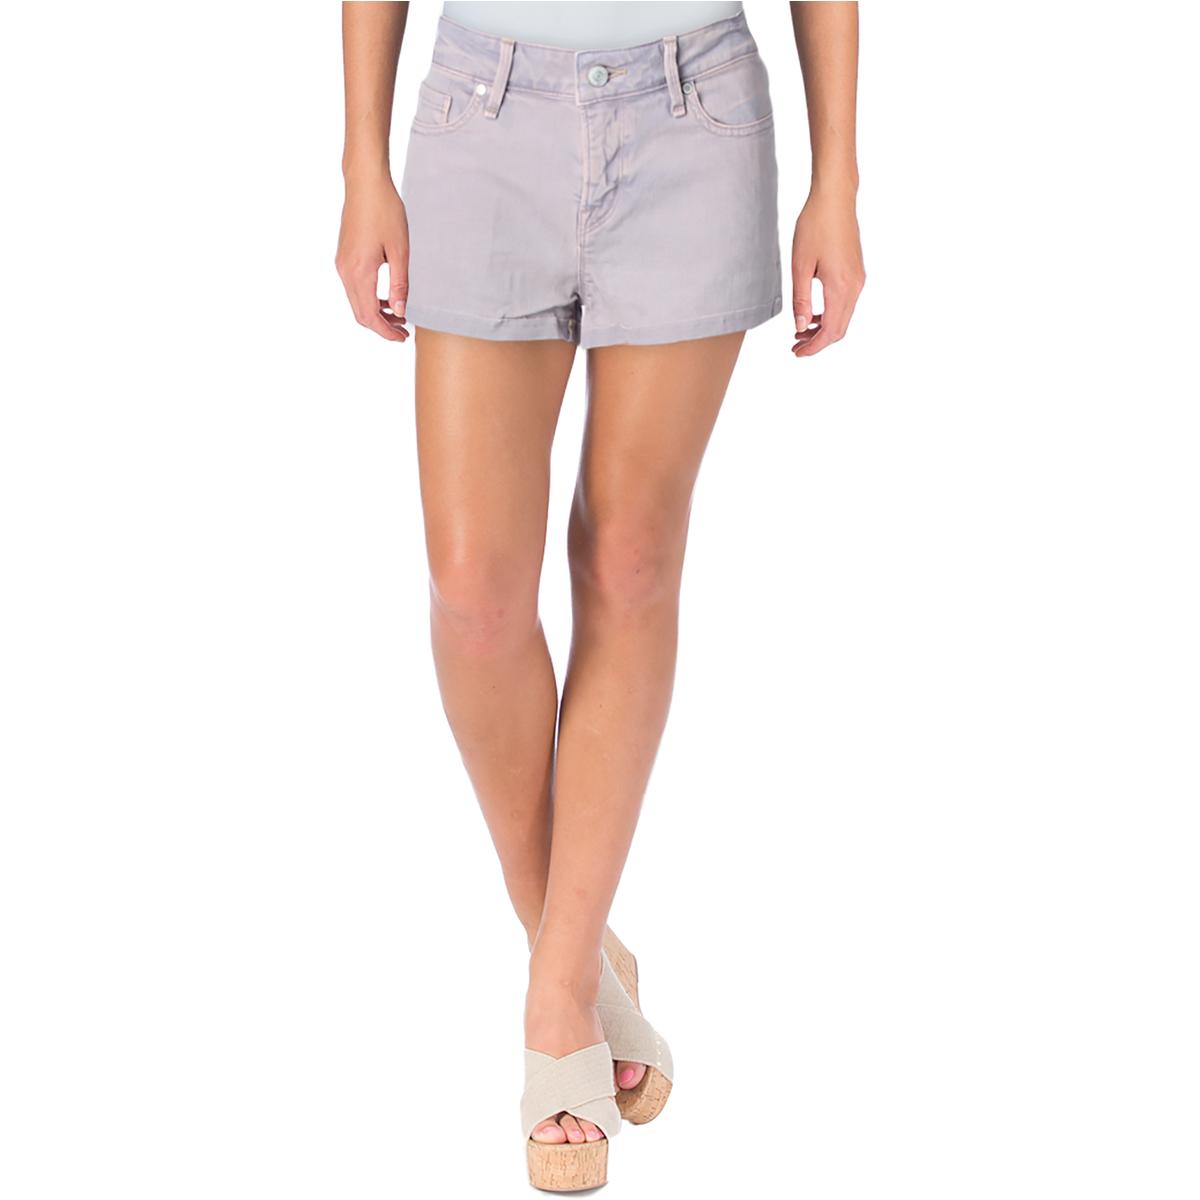 Sunset & Spring Womens Sequined Distressed Cut-Off Denim Shorts BHFO 1900